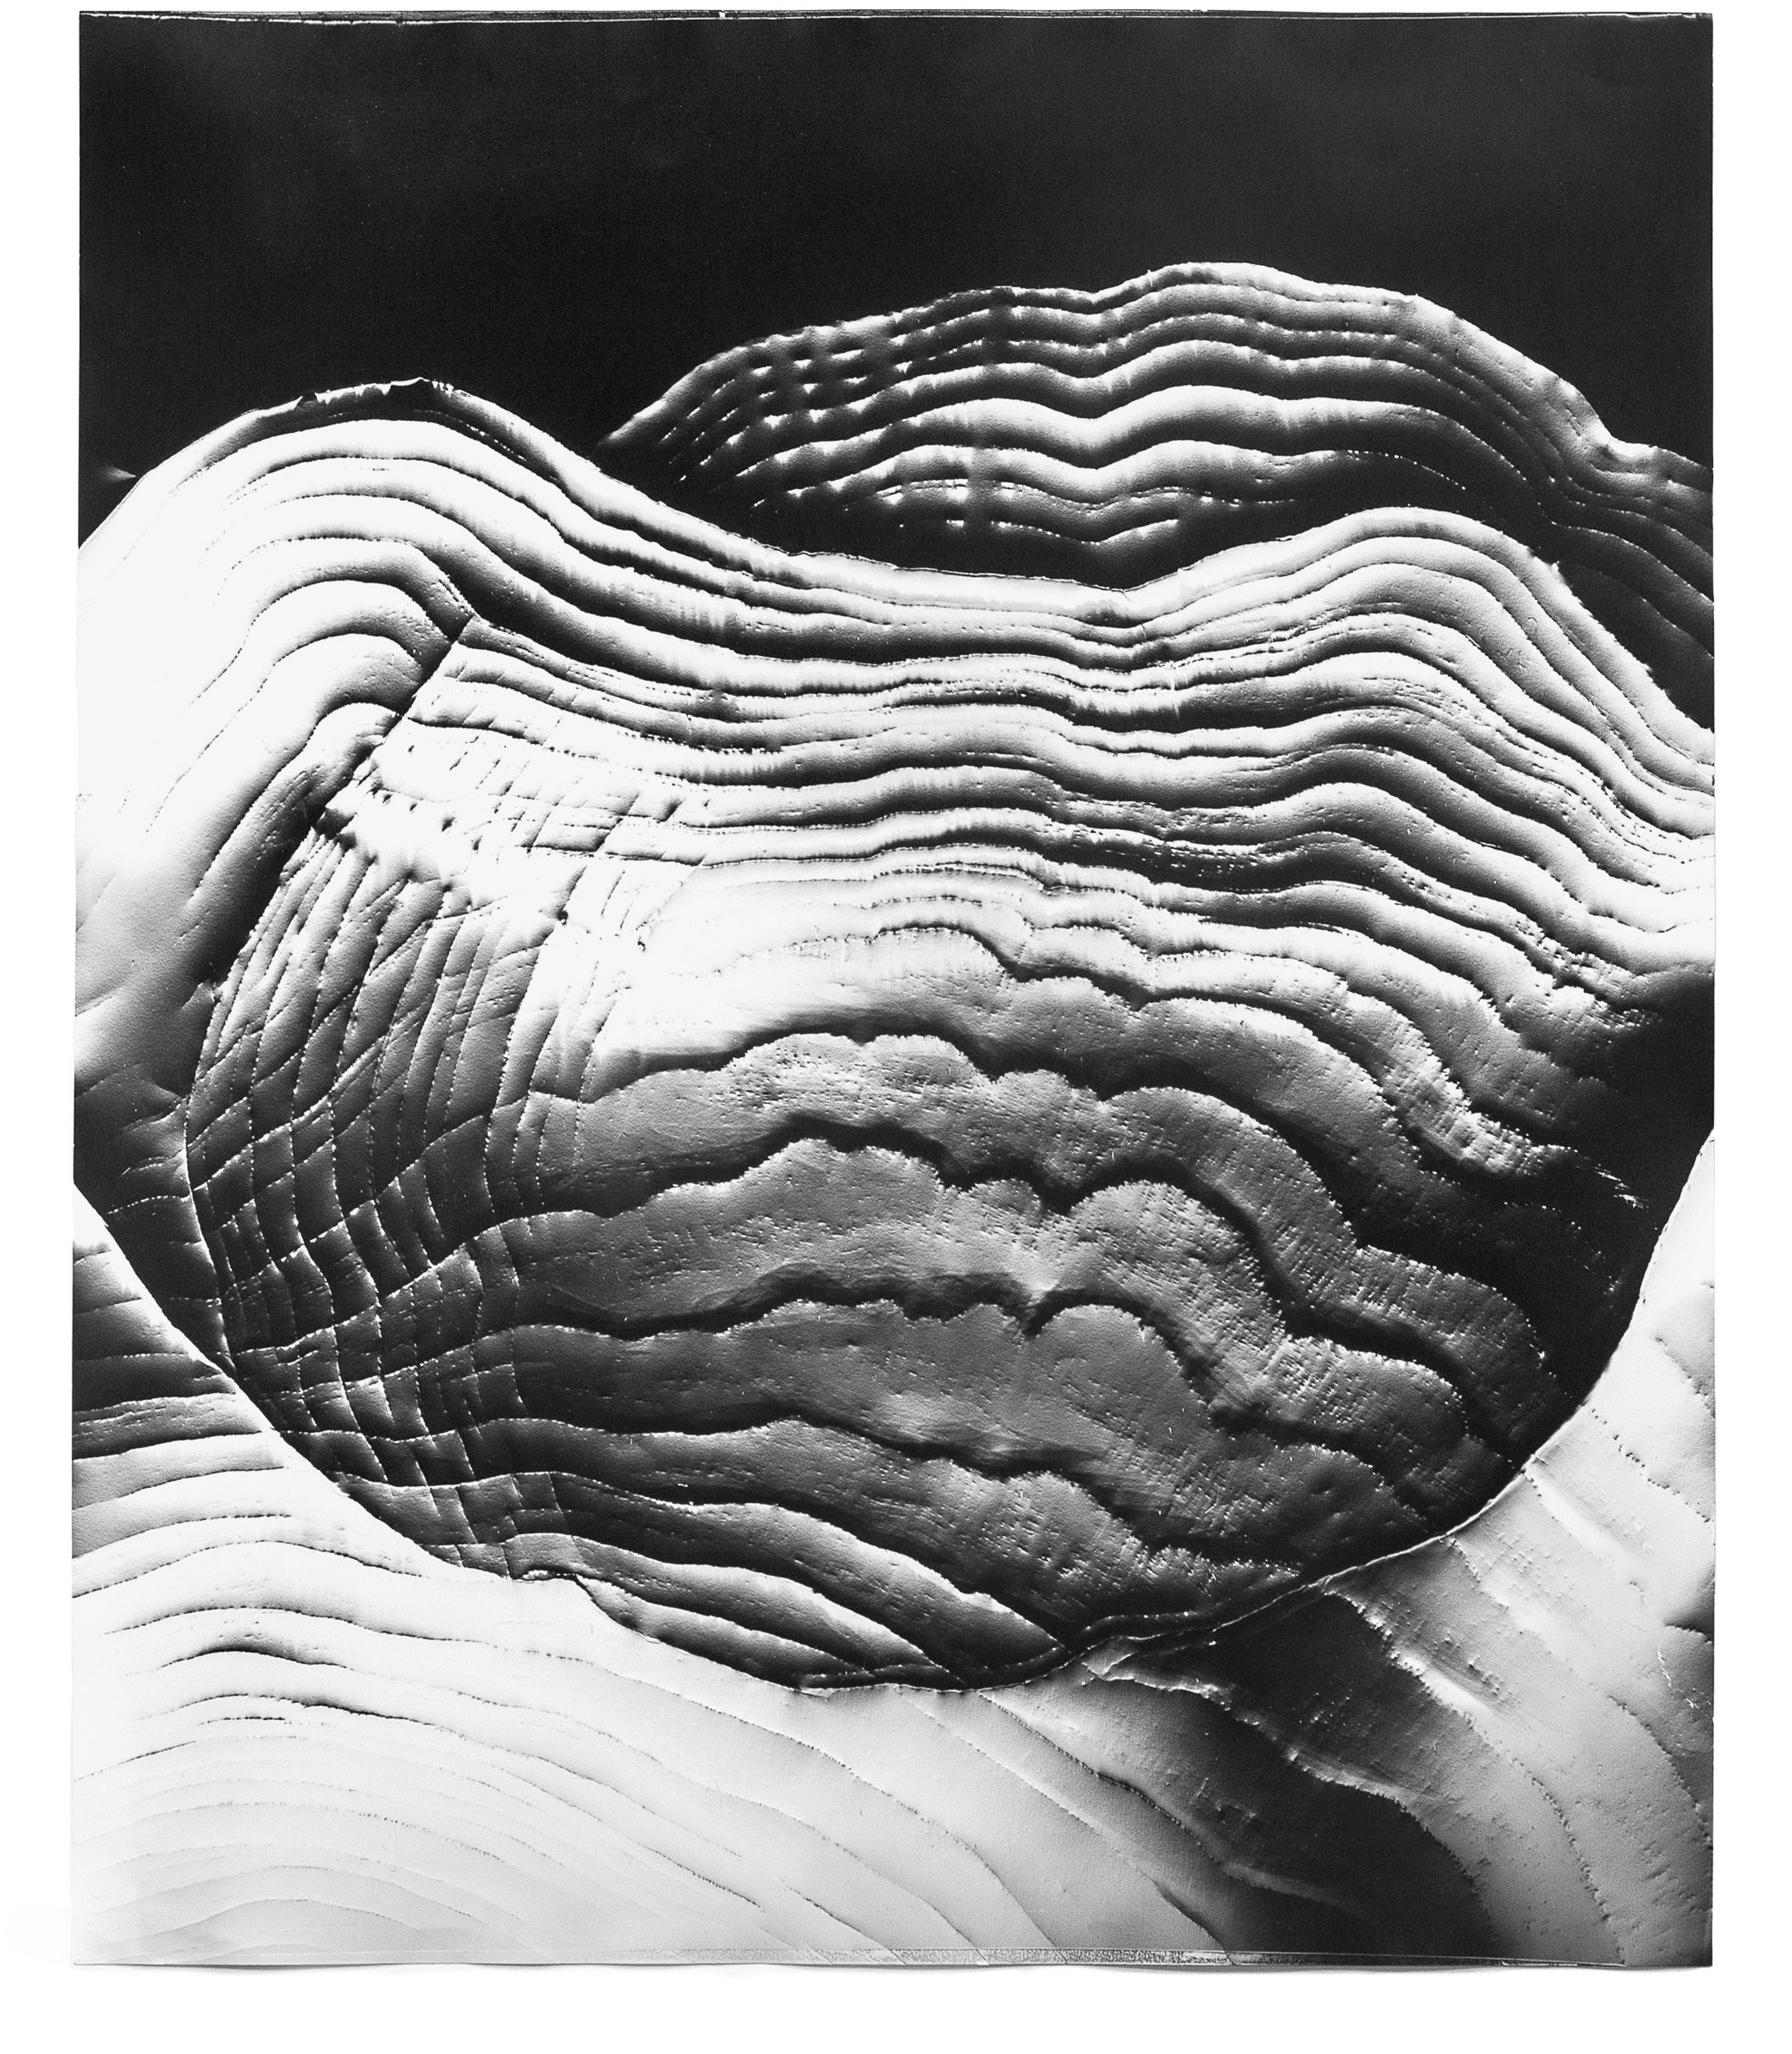   Automatic Earth 32,  2017 Photographic rubbing (embossed silver gelatin photogram) 24 x 20 in 